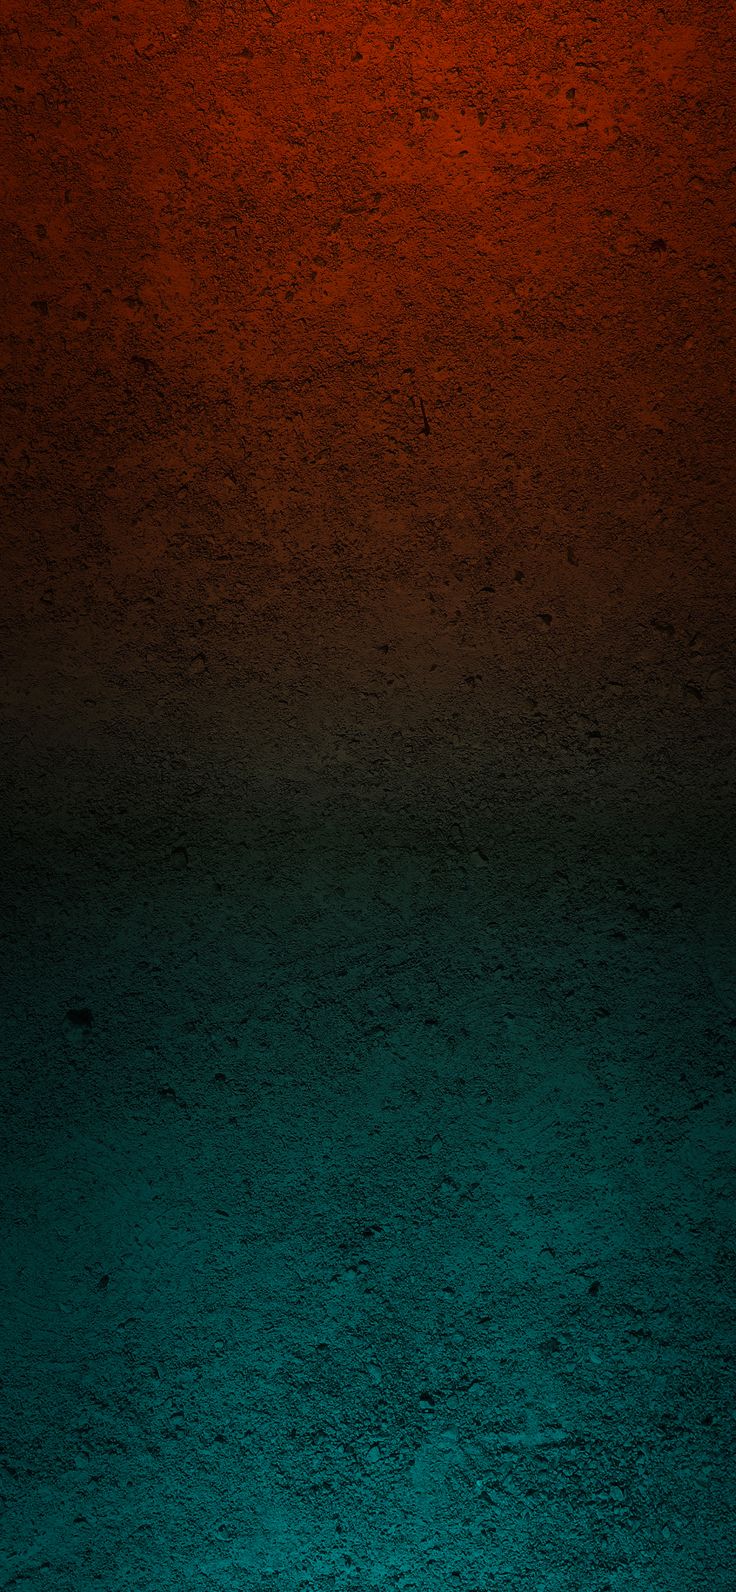 Brown and Green Gradient Central. Background HD wallpaper, Background image wallpaper, Dark phone wallpaper